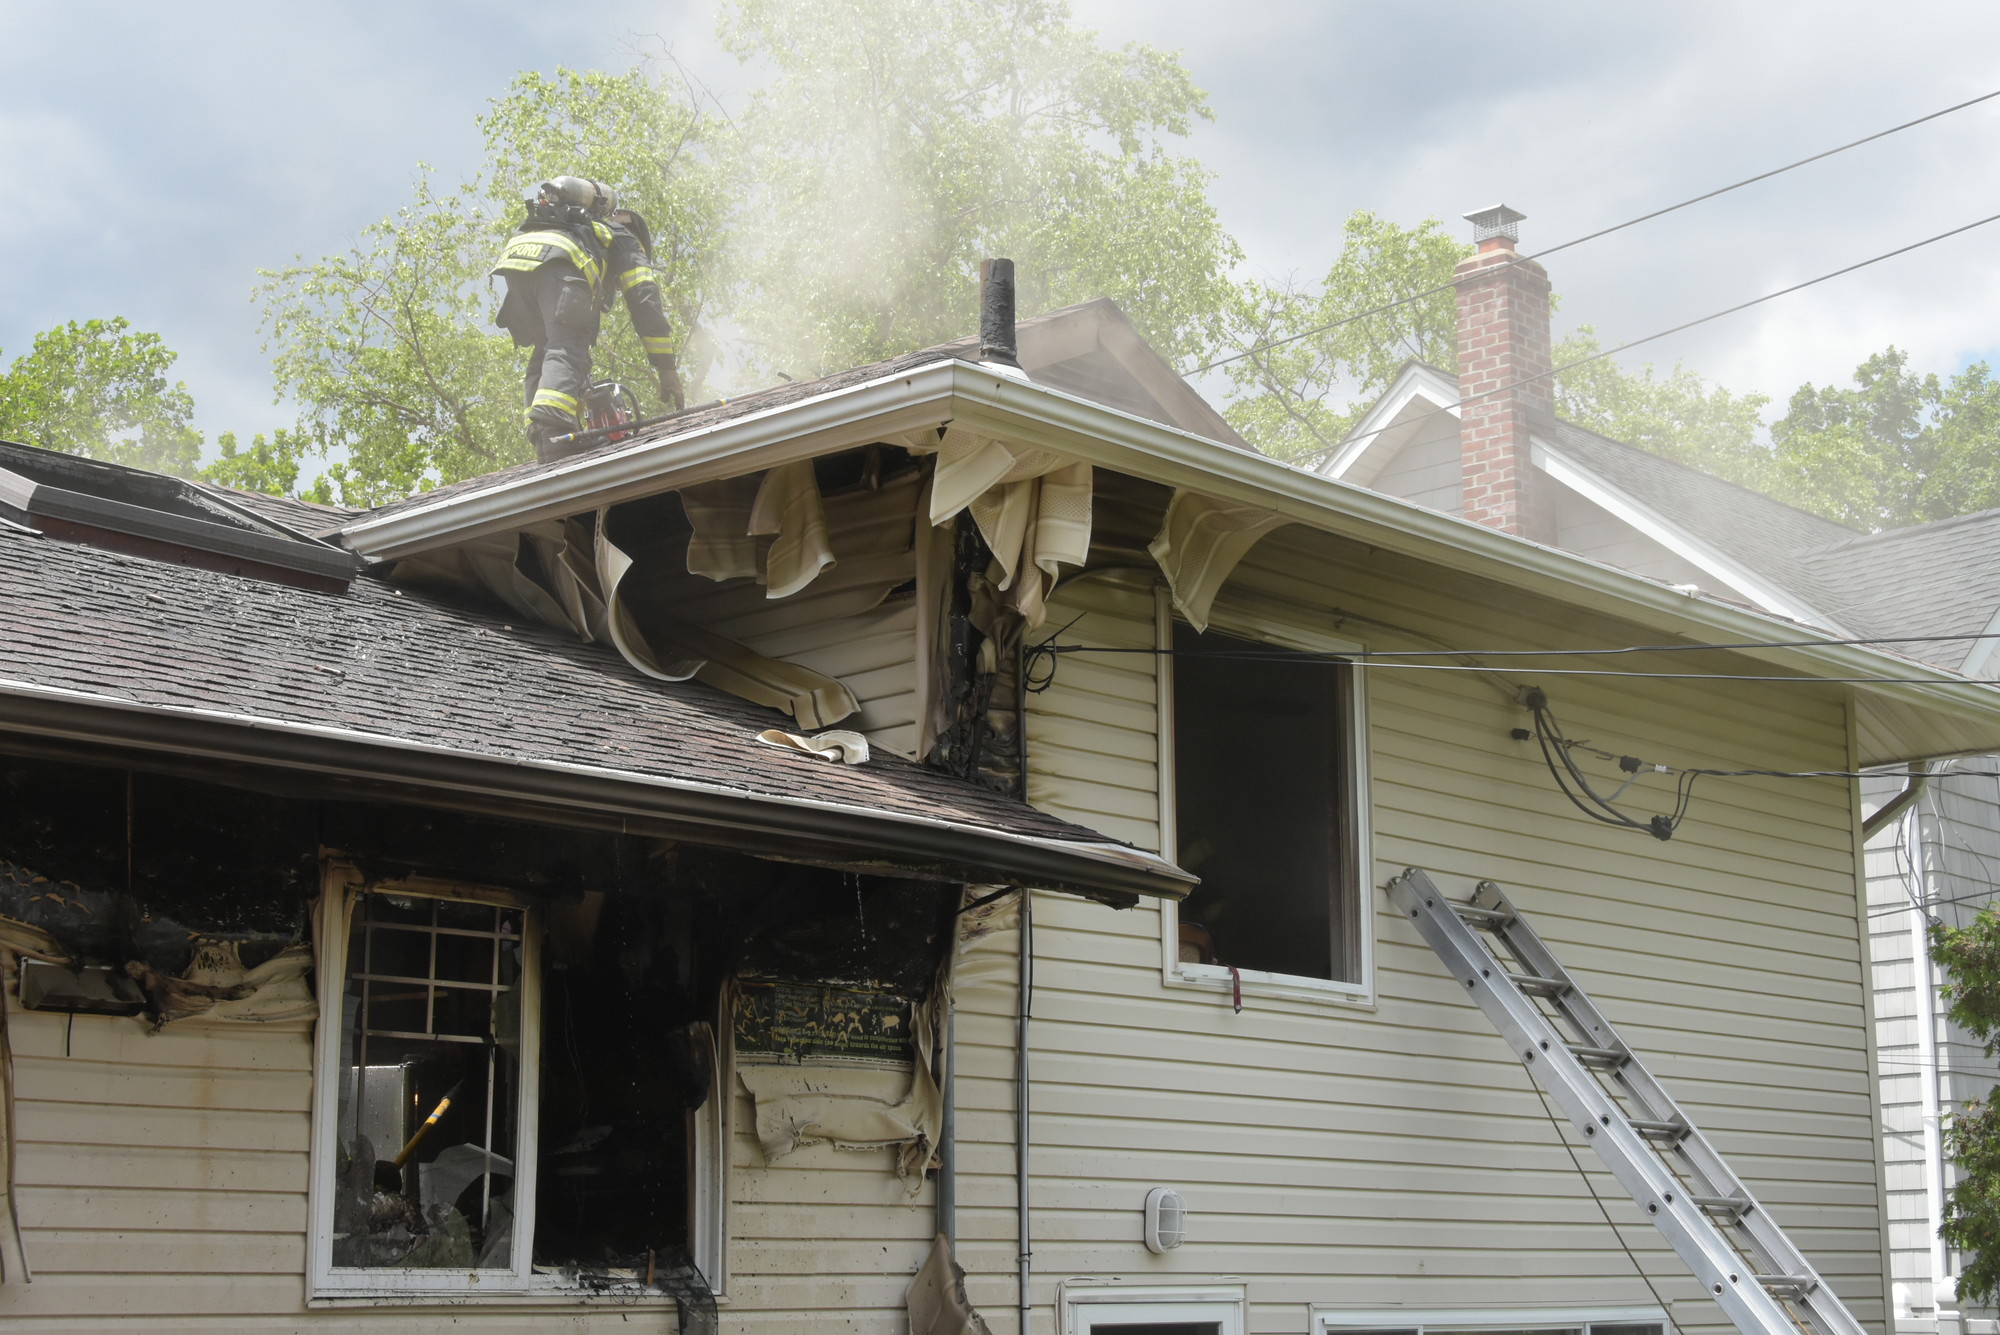 The fire was held to the kitchen and parts of the attic by volunteers.